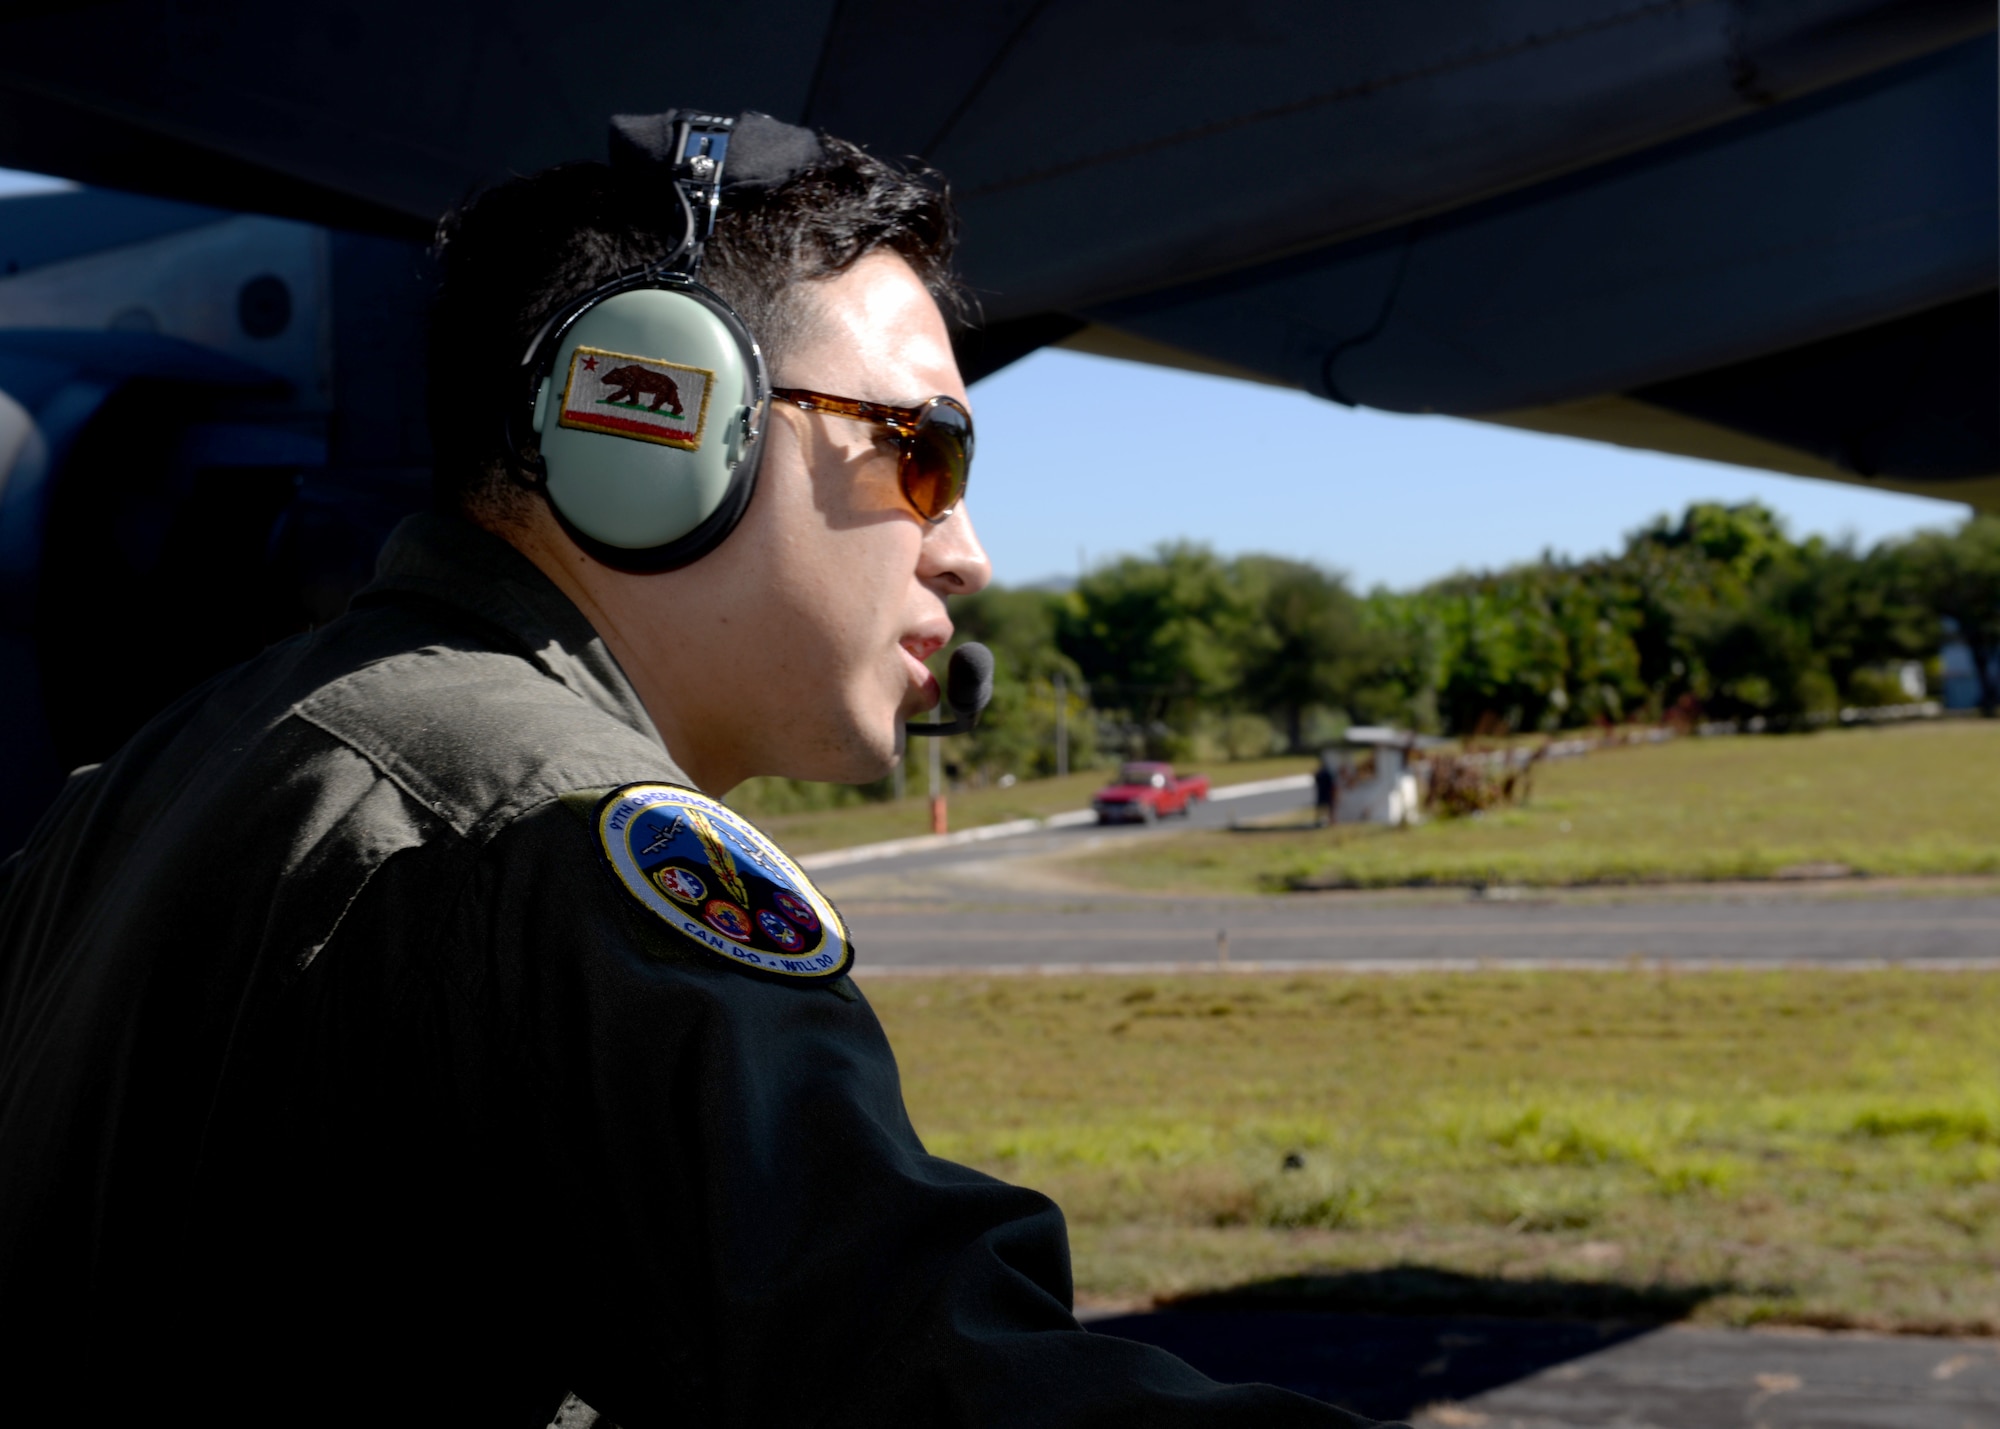 U.S. Air Force Tech Sgt. Trinidad Gutierrez, 97th Operations Group instructor loadmaster, guides a U.S. Air Force C-17 Globemaster III cargo aircraft, while it reverses on a runway at Ilopango International Airport in San Salvador, El Savador, Jan. 30, during the 2016 Ilopango Airshow. The C-17 was sent from Altus Air Force Base, Okla., to foster relationships between the U.S. and El Salvador. The aircraft was setup as a static display for the attendees to view and learn about some of its capabilities. (U.S. Air Force photo by Senior Airman Franklin R. Ramos/Released)